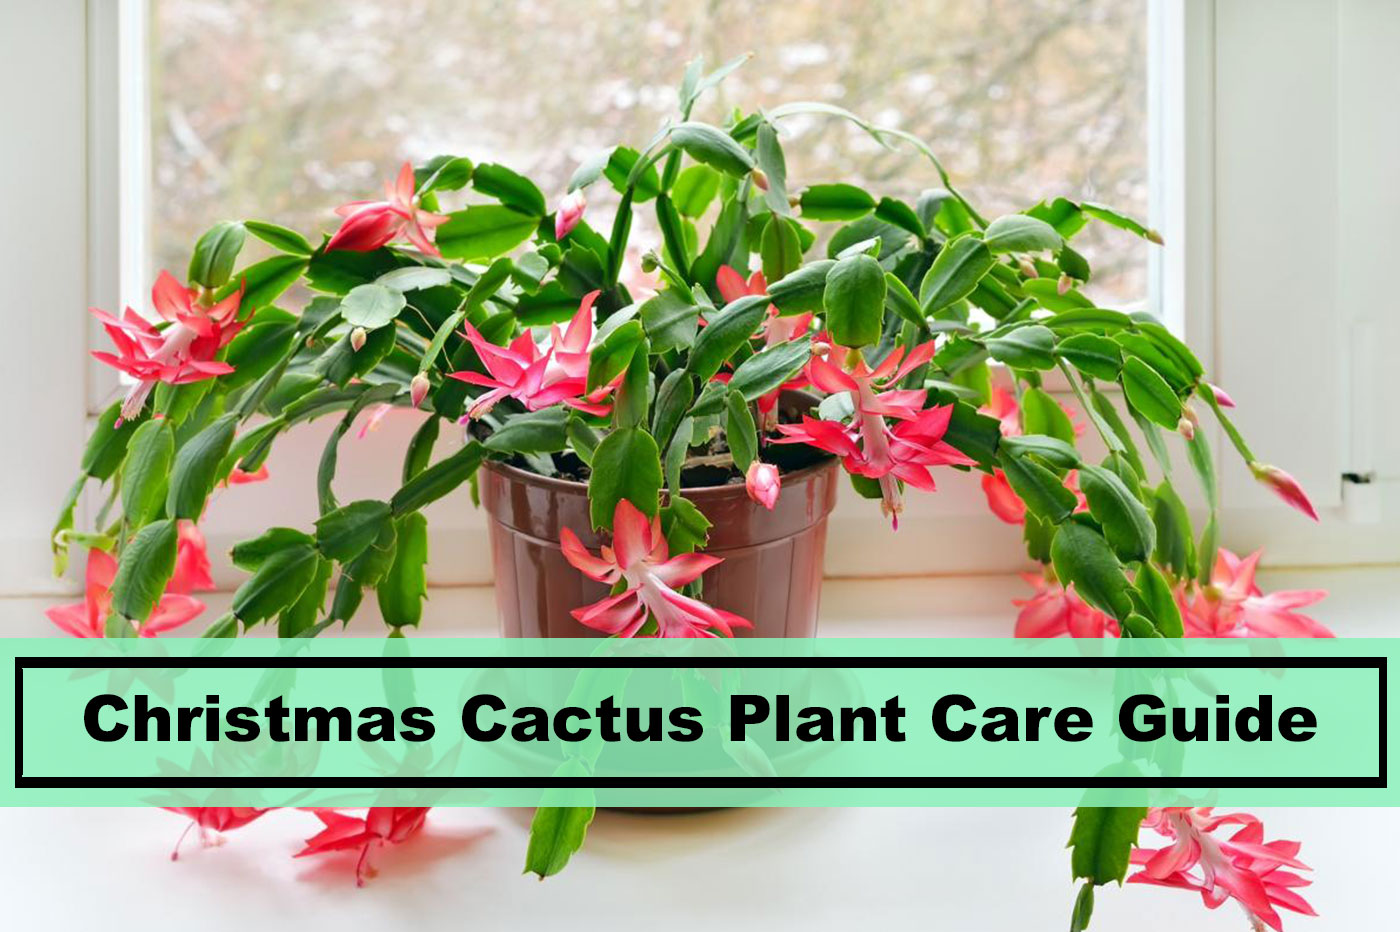 Caring tips for Christmas Cactus Plants